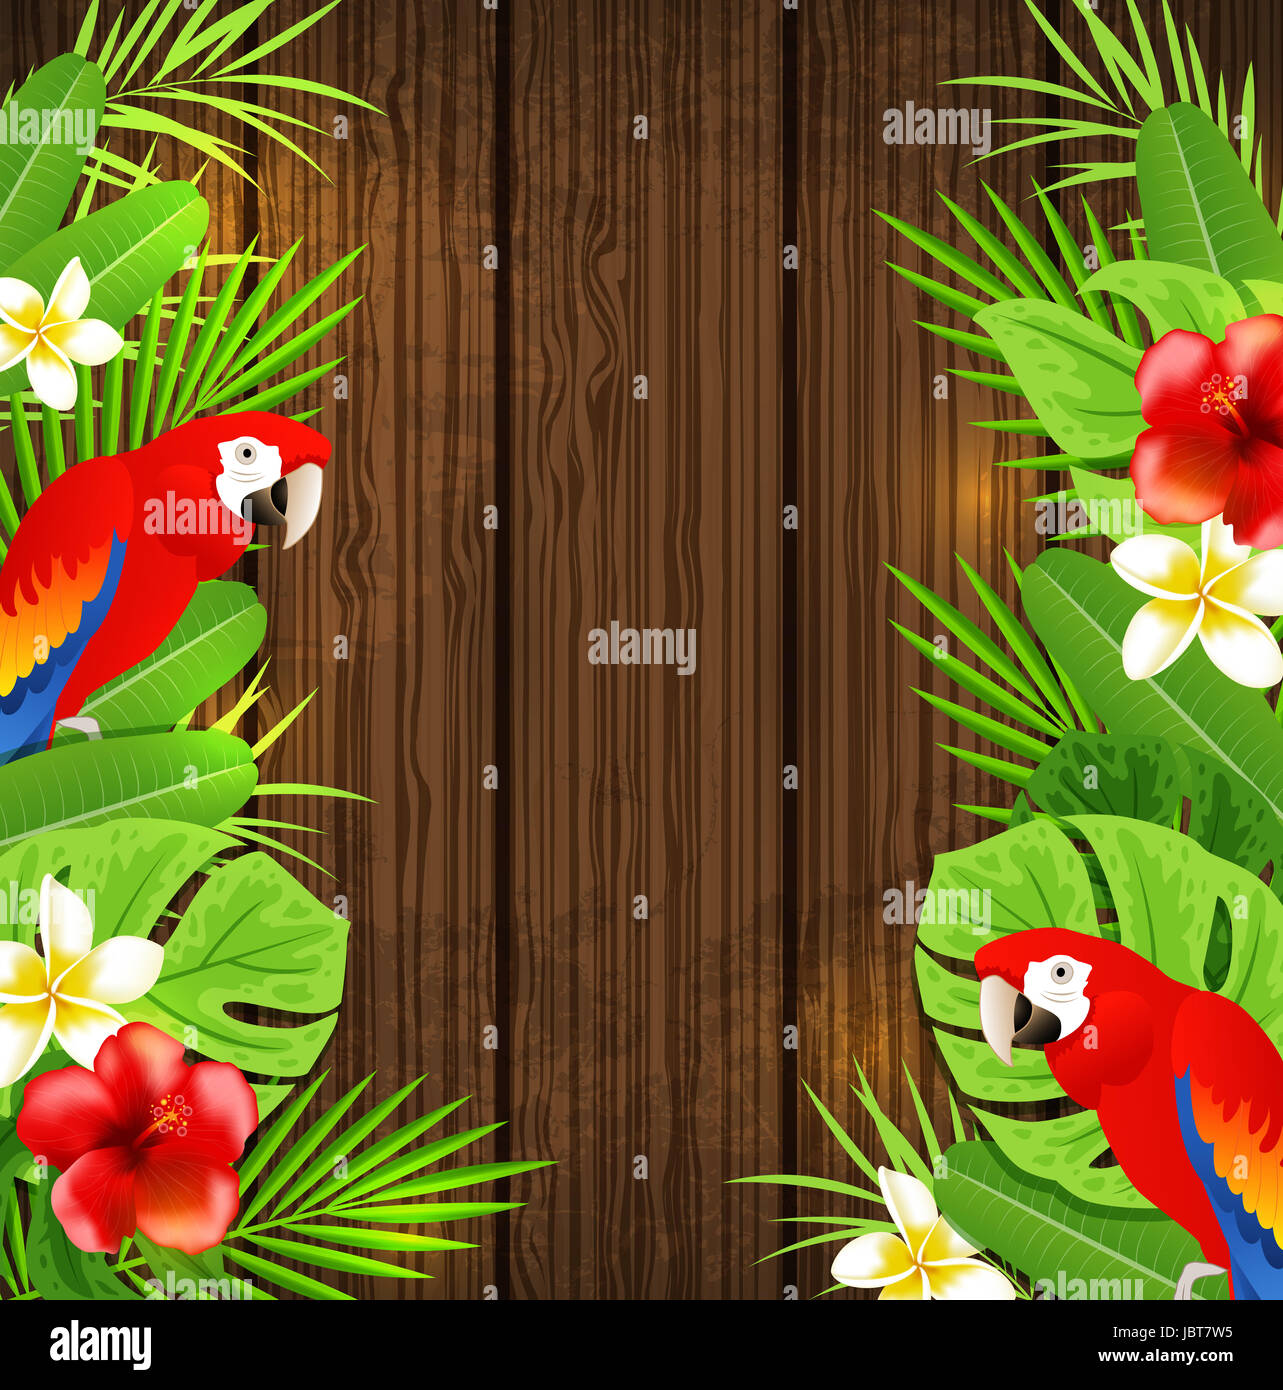 Tropical flowers, green palm leaves and red parrots on a wooden background Stock Photo